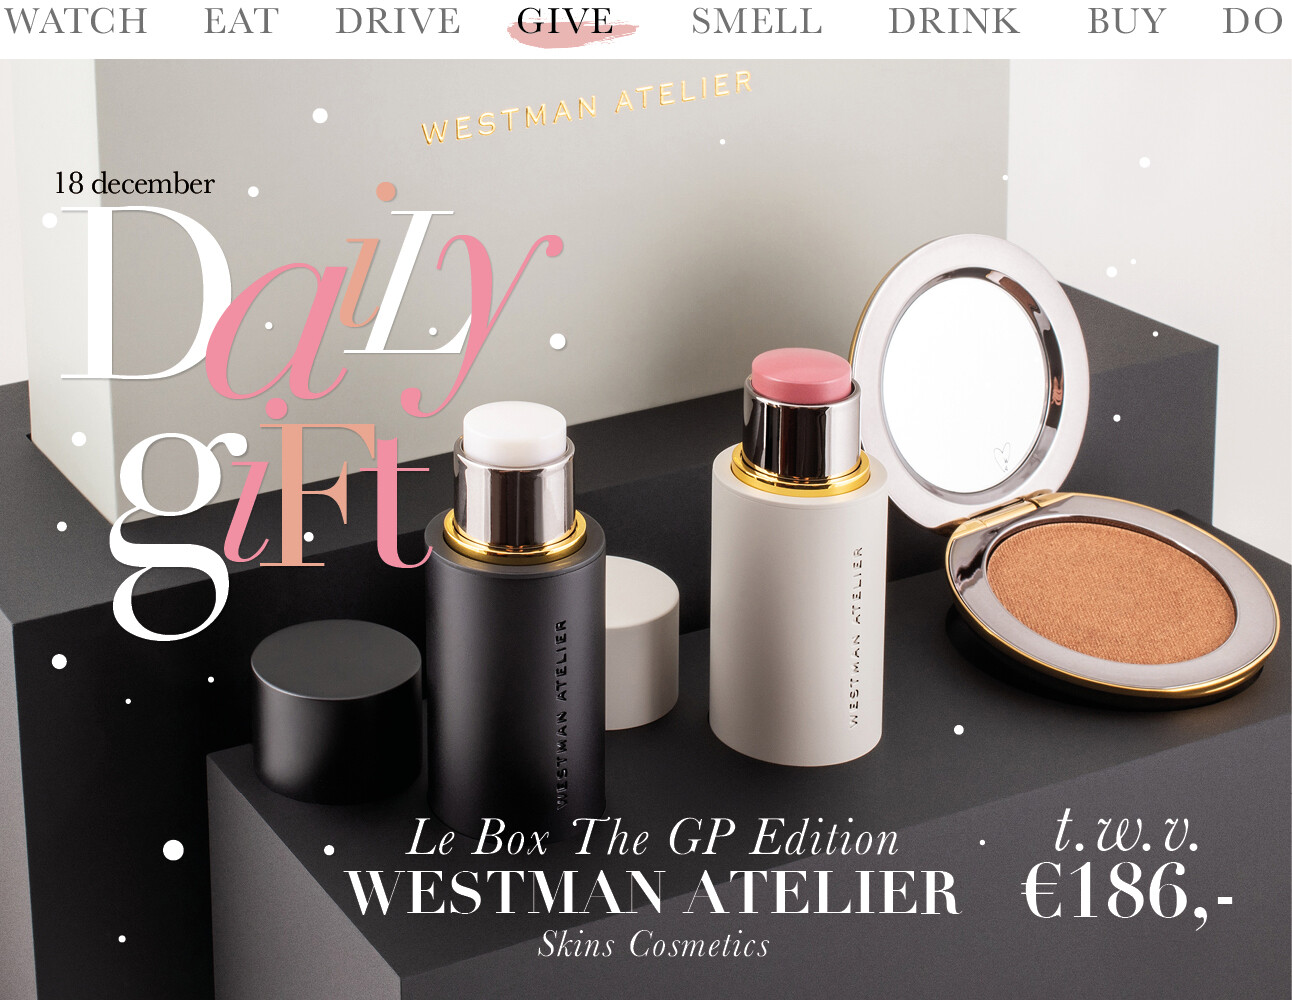 Today We Give Westman atelier skins cosmetics